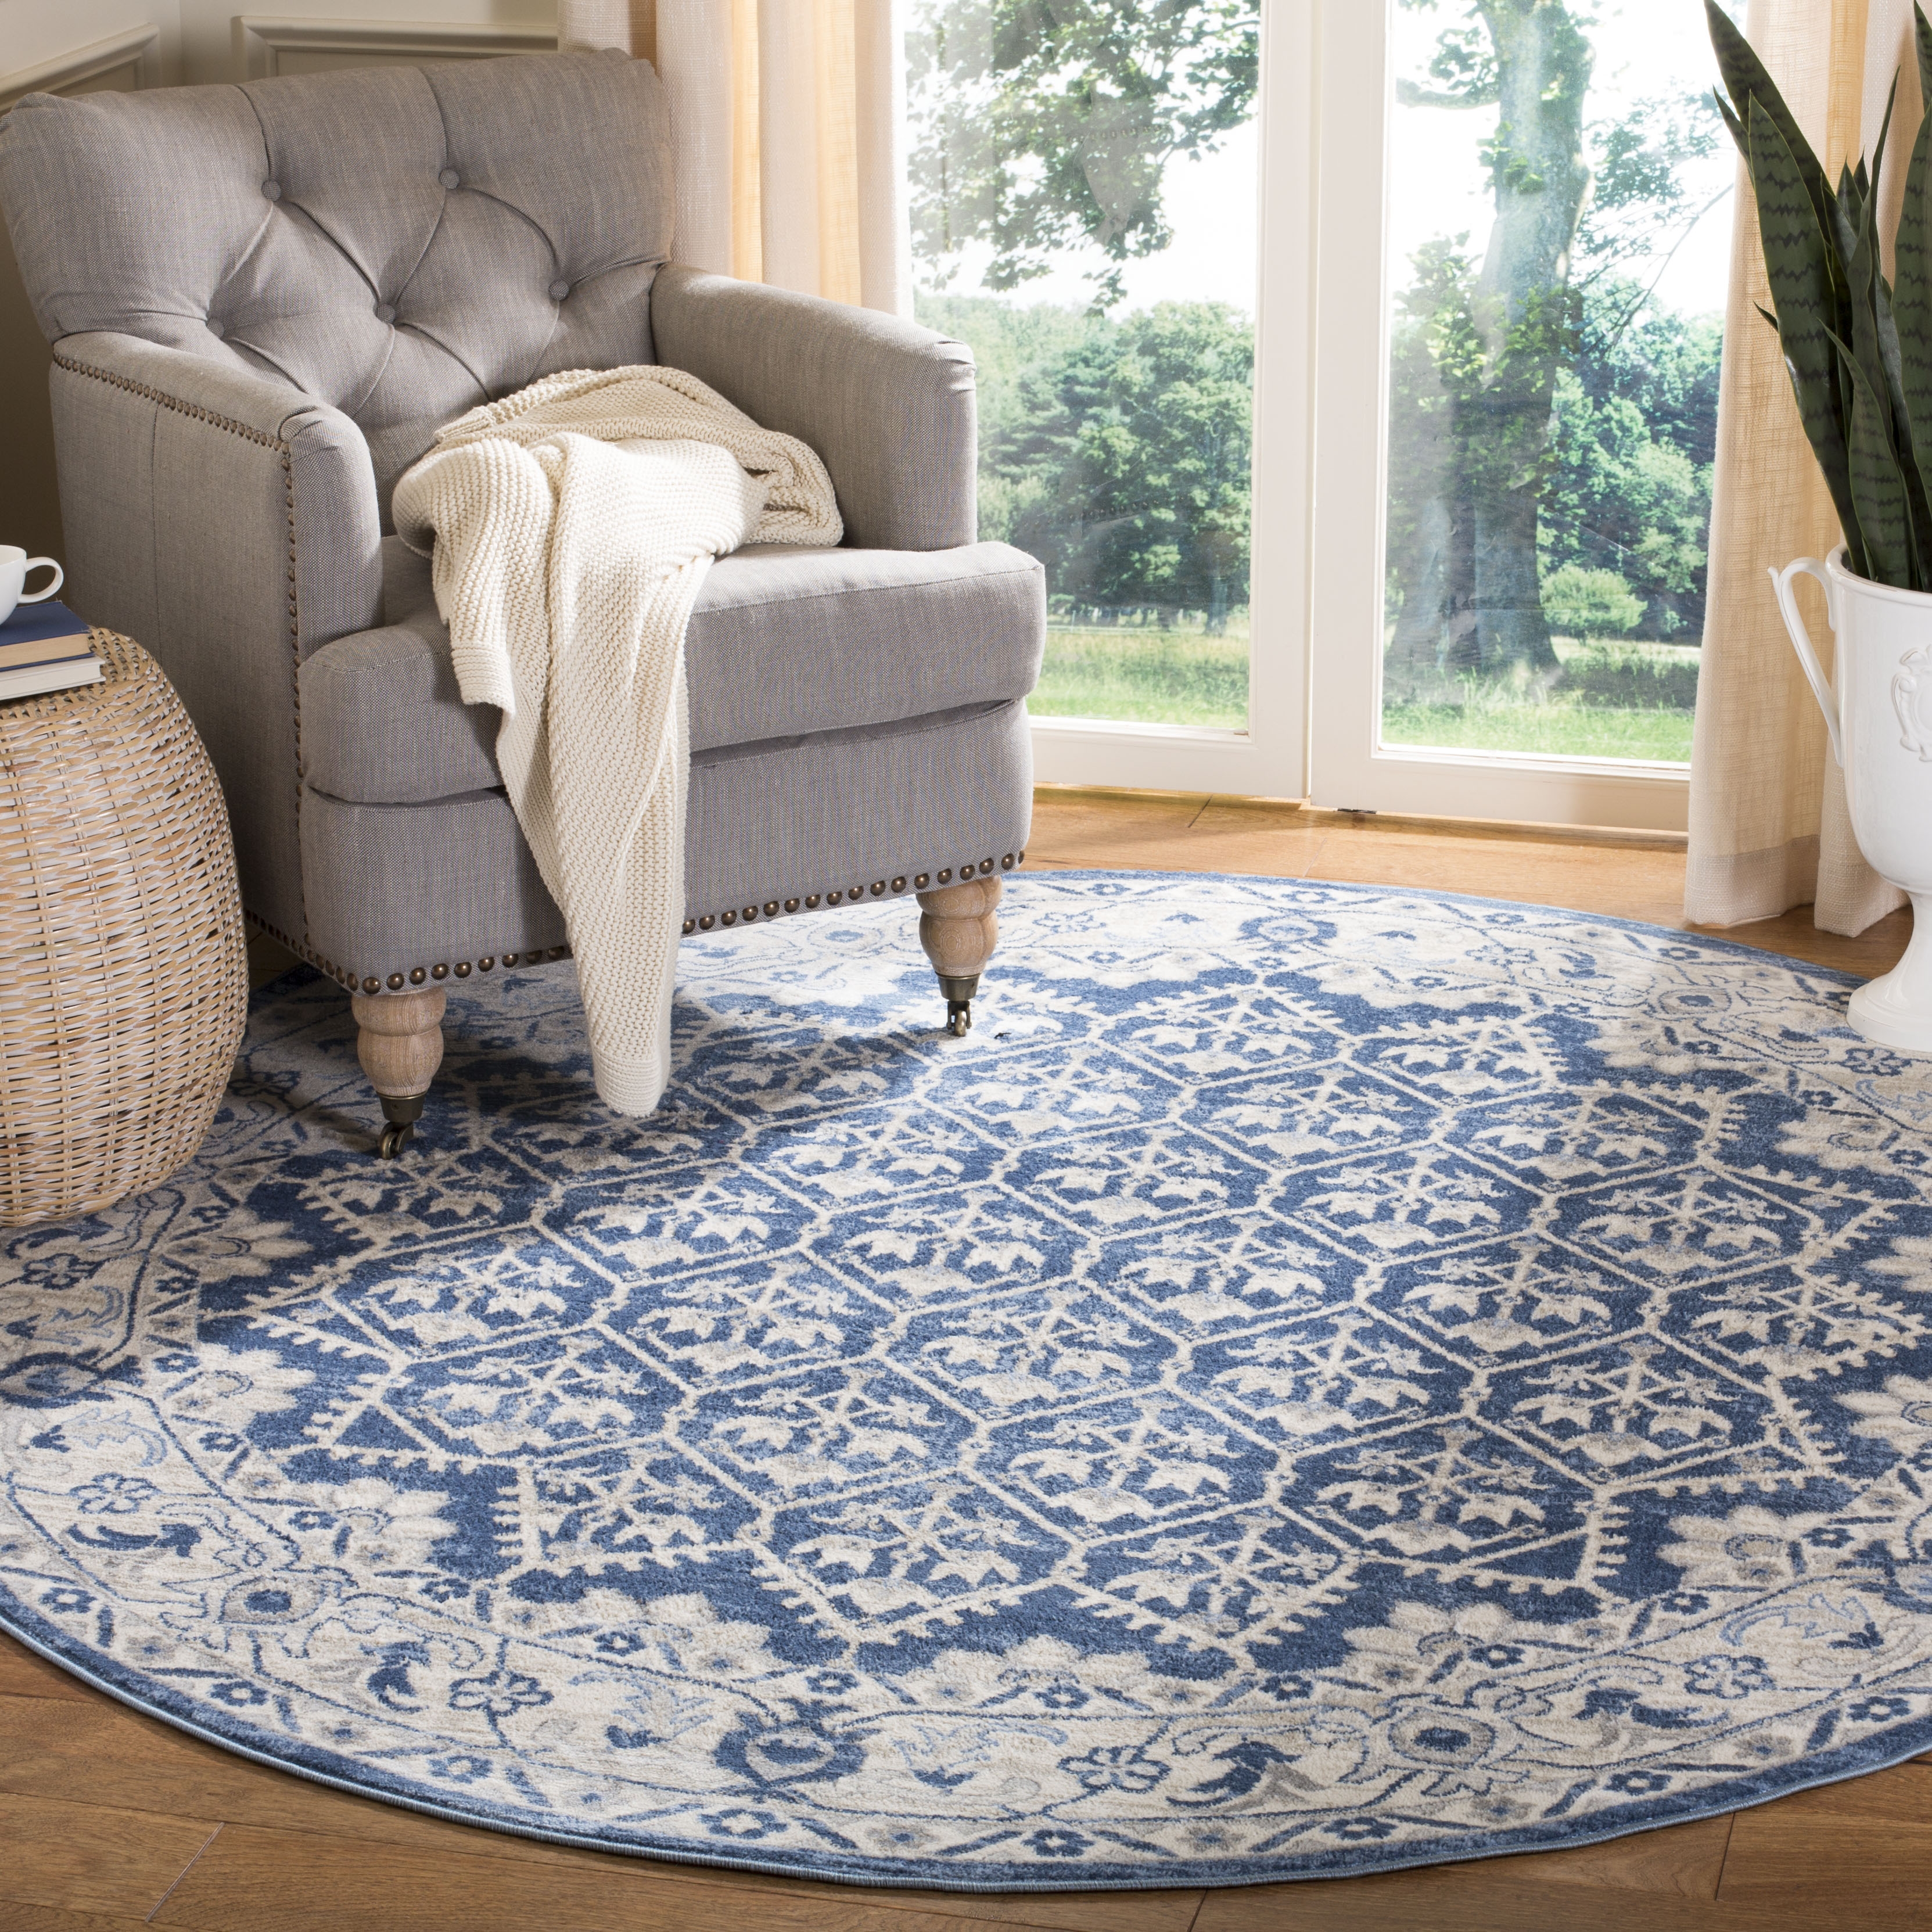 Arlo Home Woven Area Rug, BNT869M, Navy/Light Grey,  6' 7" X 6' 7" Round - Image 1